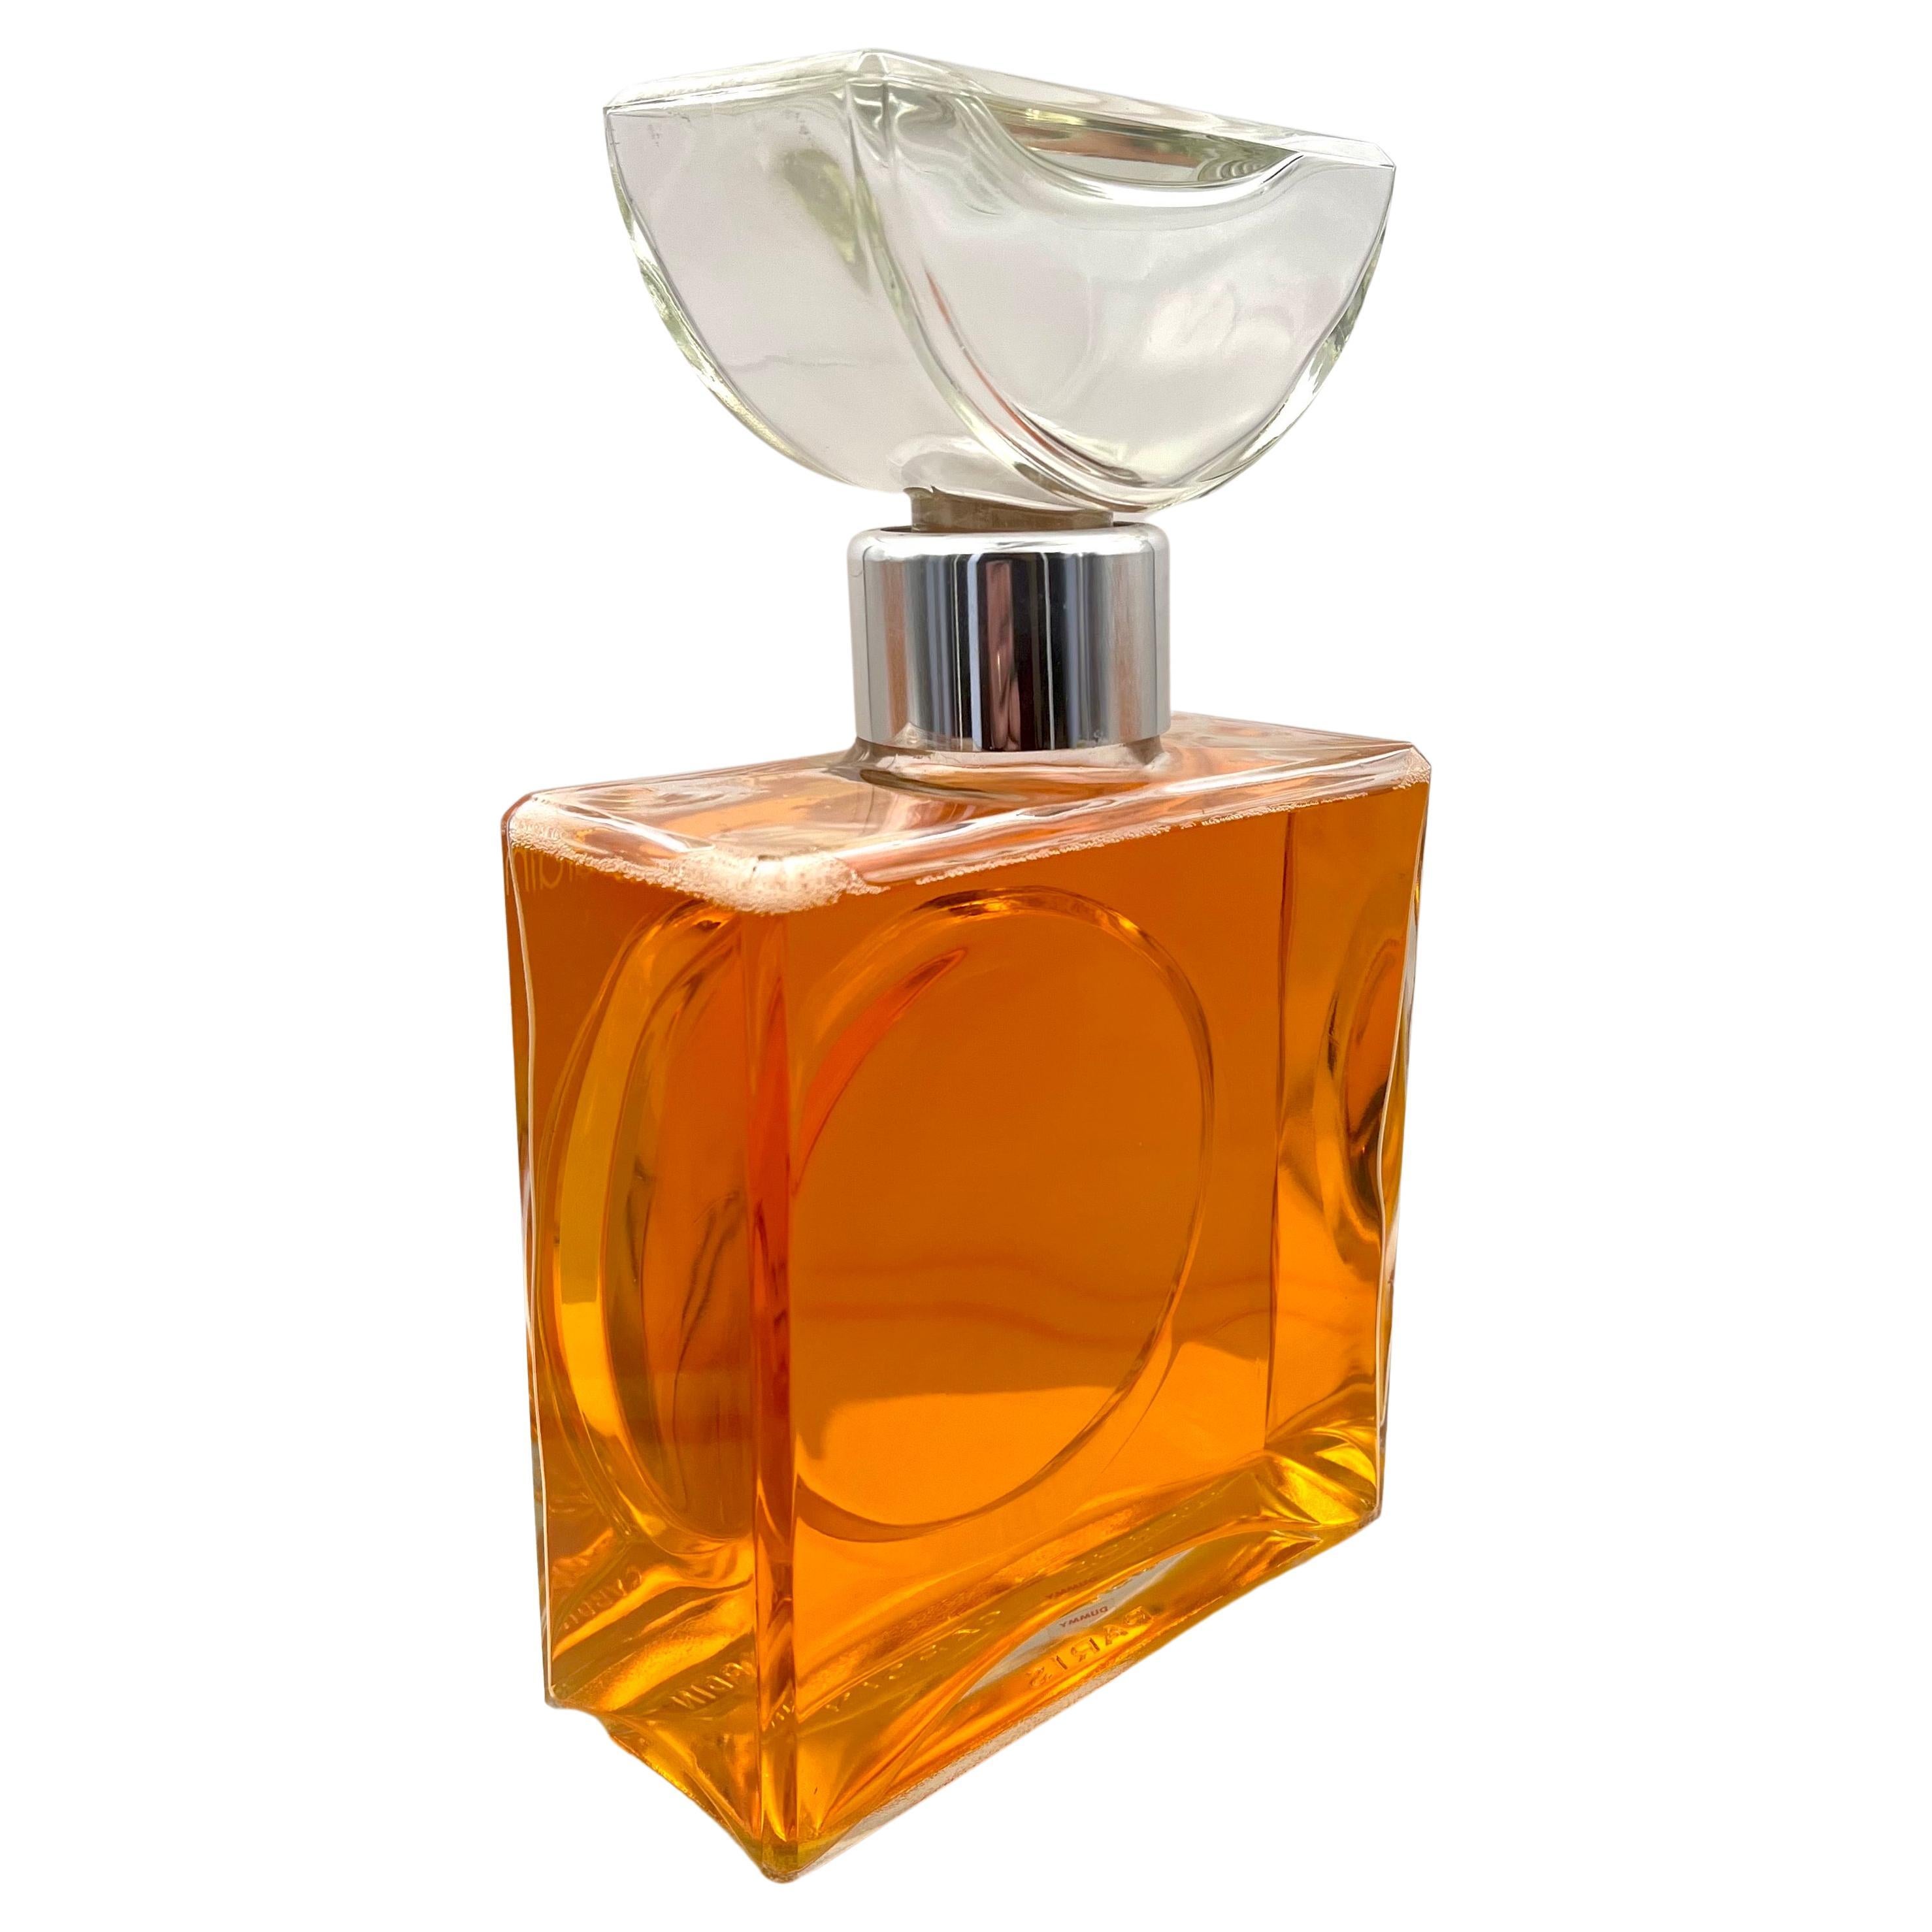 Authentic incredible large display perfume bottle by Pierre Cardin France, made of glass with liquid in excellent condition.